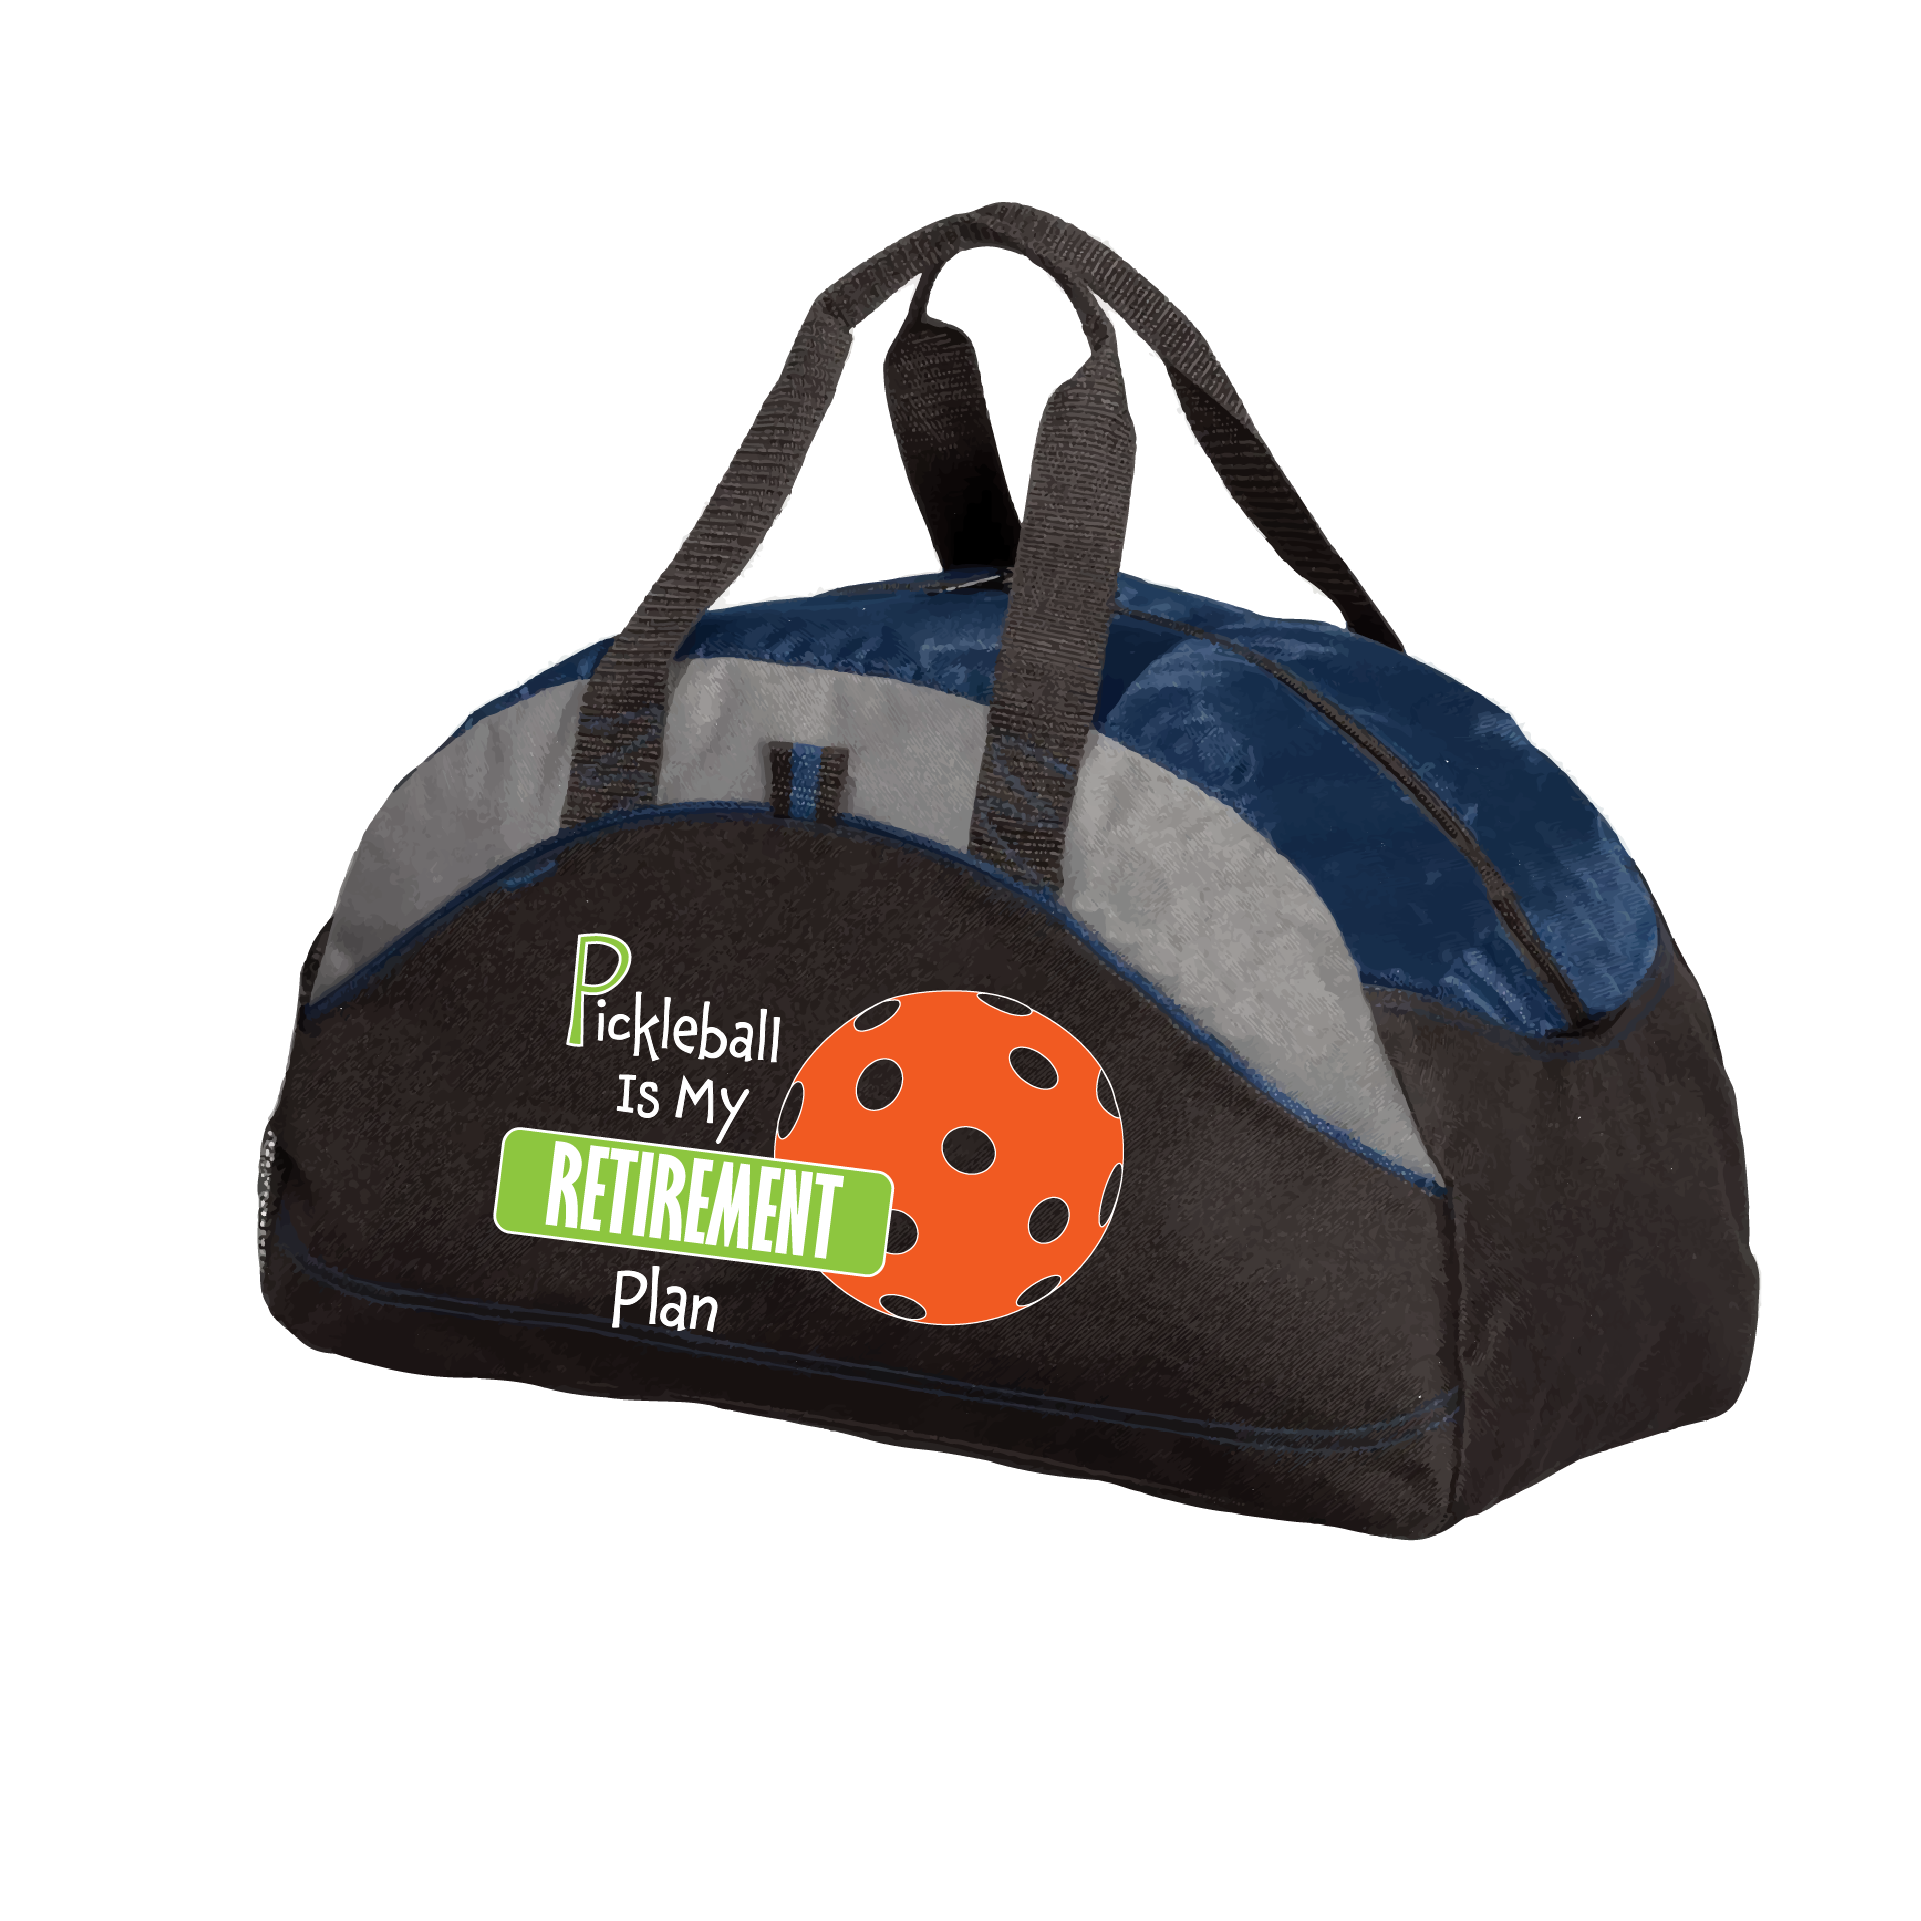 Pickleball Duffel Bag Design: Retirement Plan  Carry your gear in comfort and style. This fun pickleball duffel bag is the perfect accessory for all pickleball players needing to keep their gear in one place. This medium sized duffel tote is ideal for all your pickleball activities. The large center compartment allows for plenty of space and the mesh end pocket is perfect for holding a water bottle. 